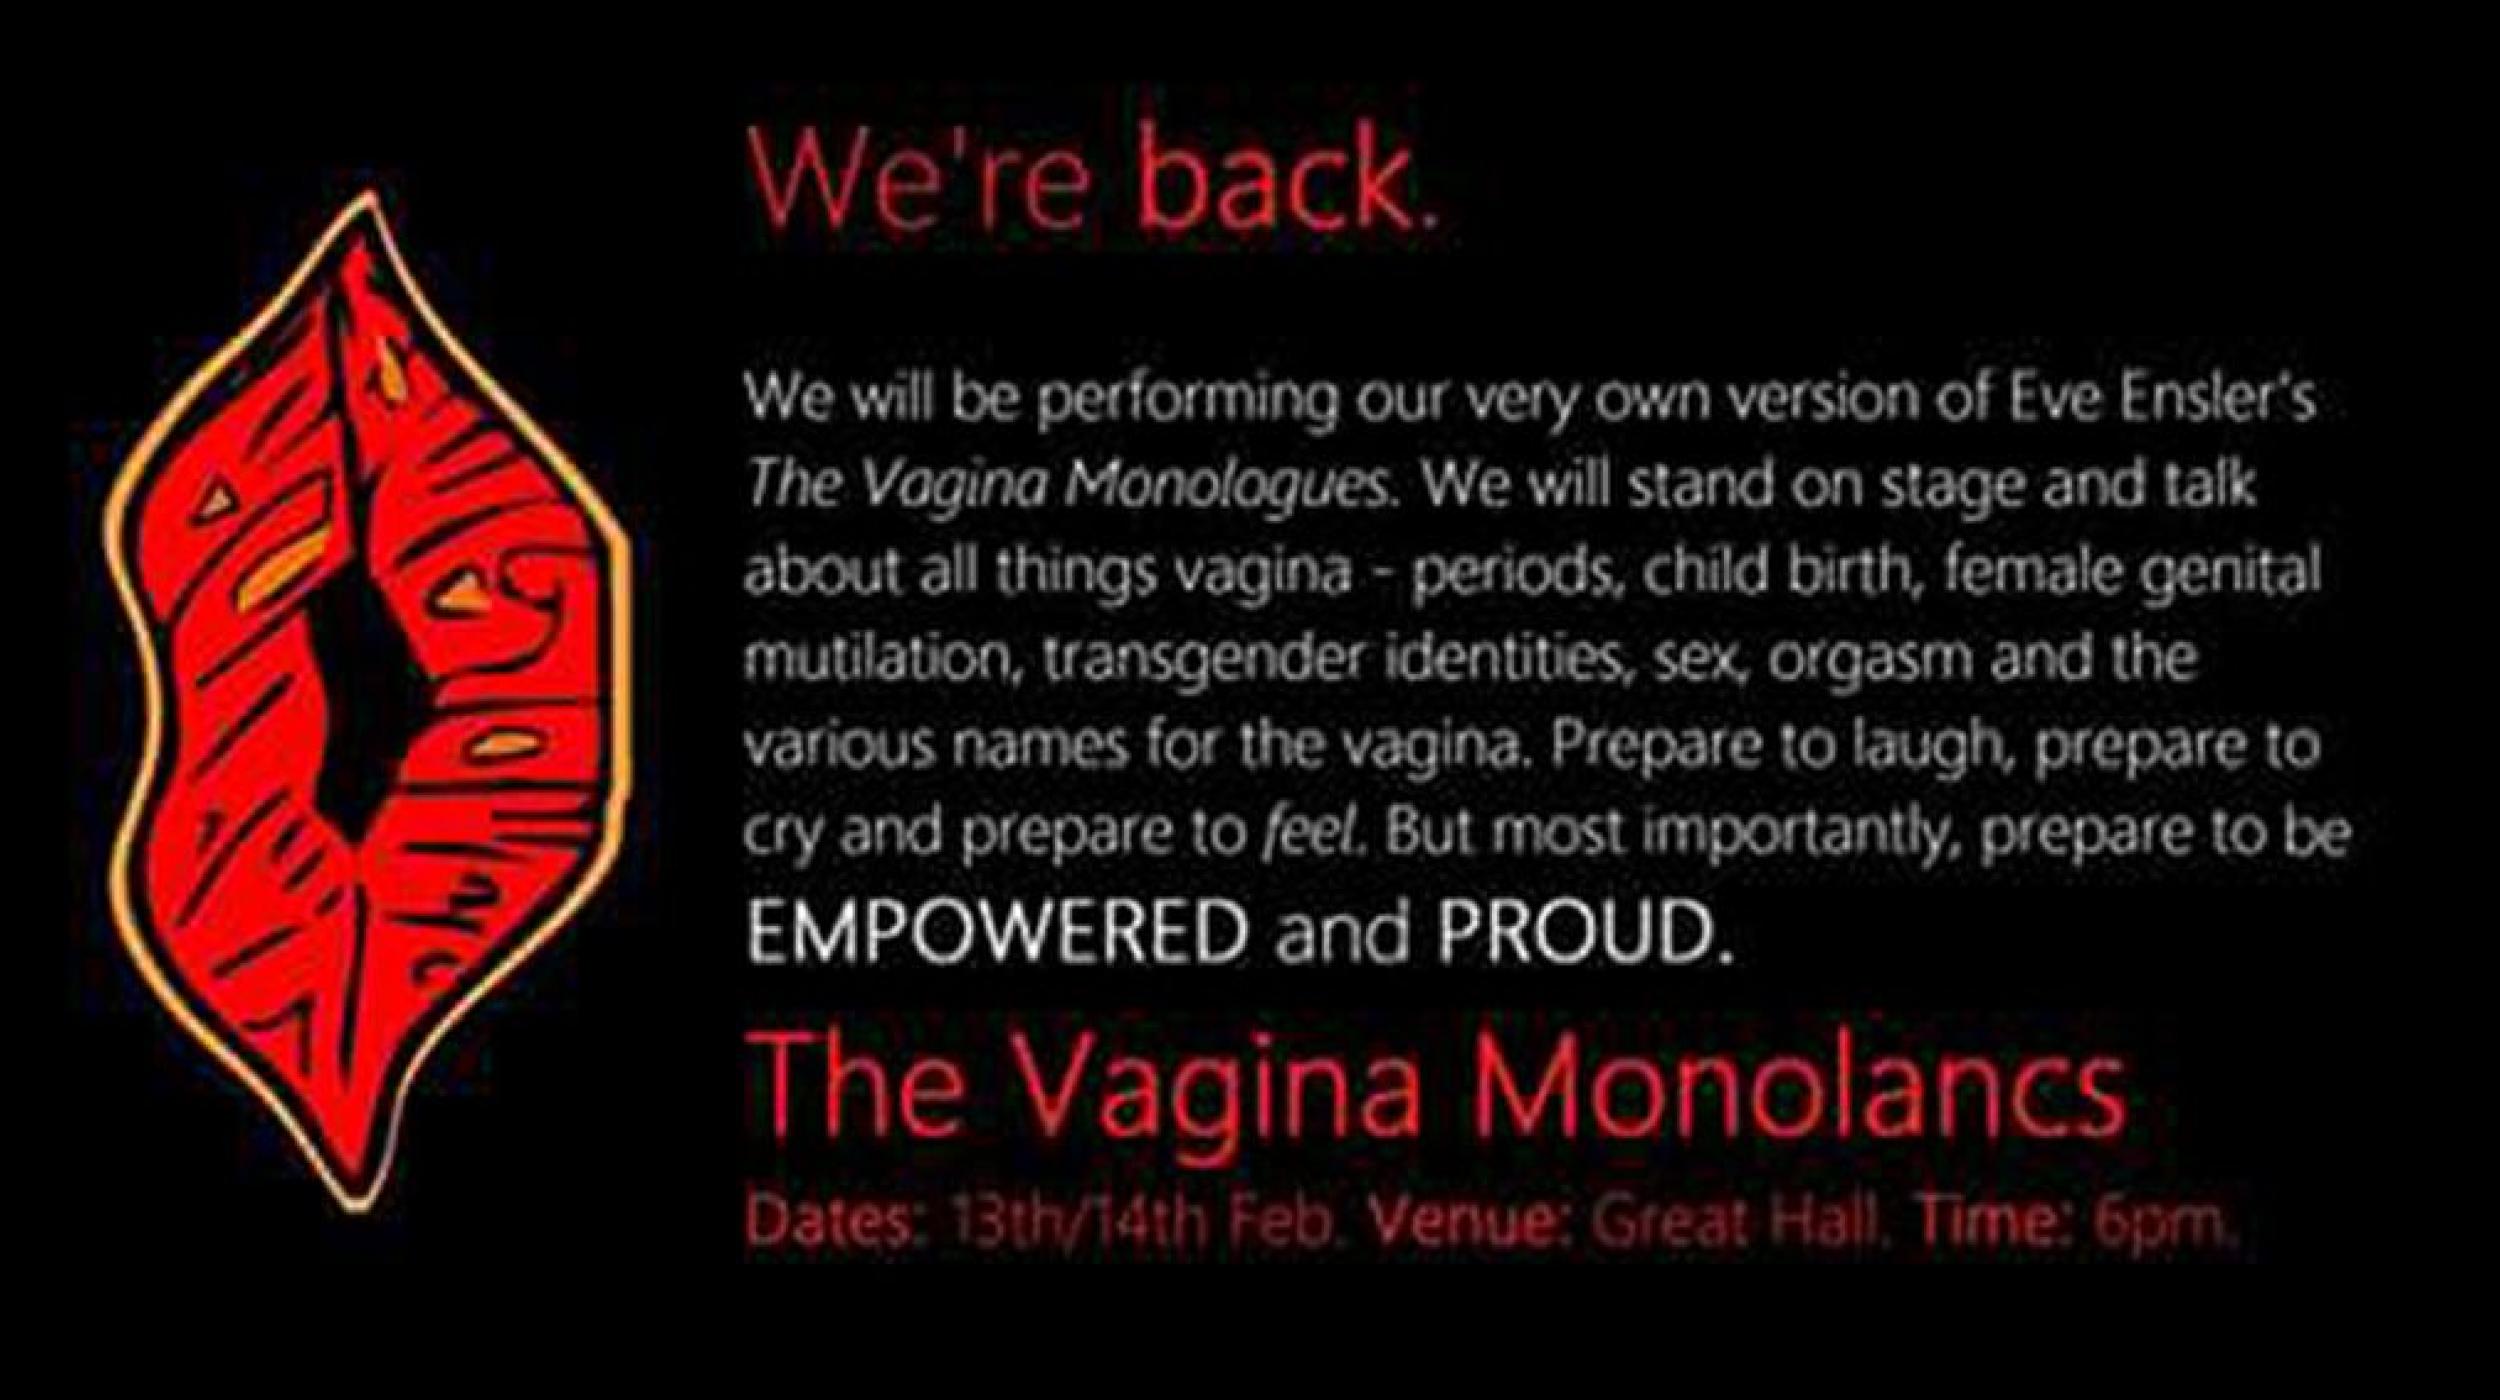 FestQFringe: is 'The Vagina Monologues' relevant today?